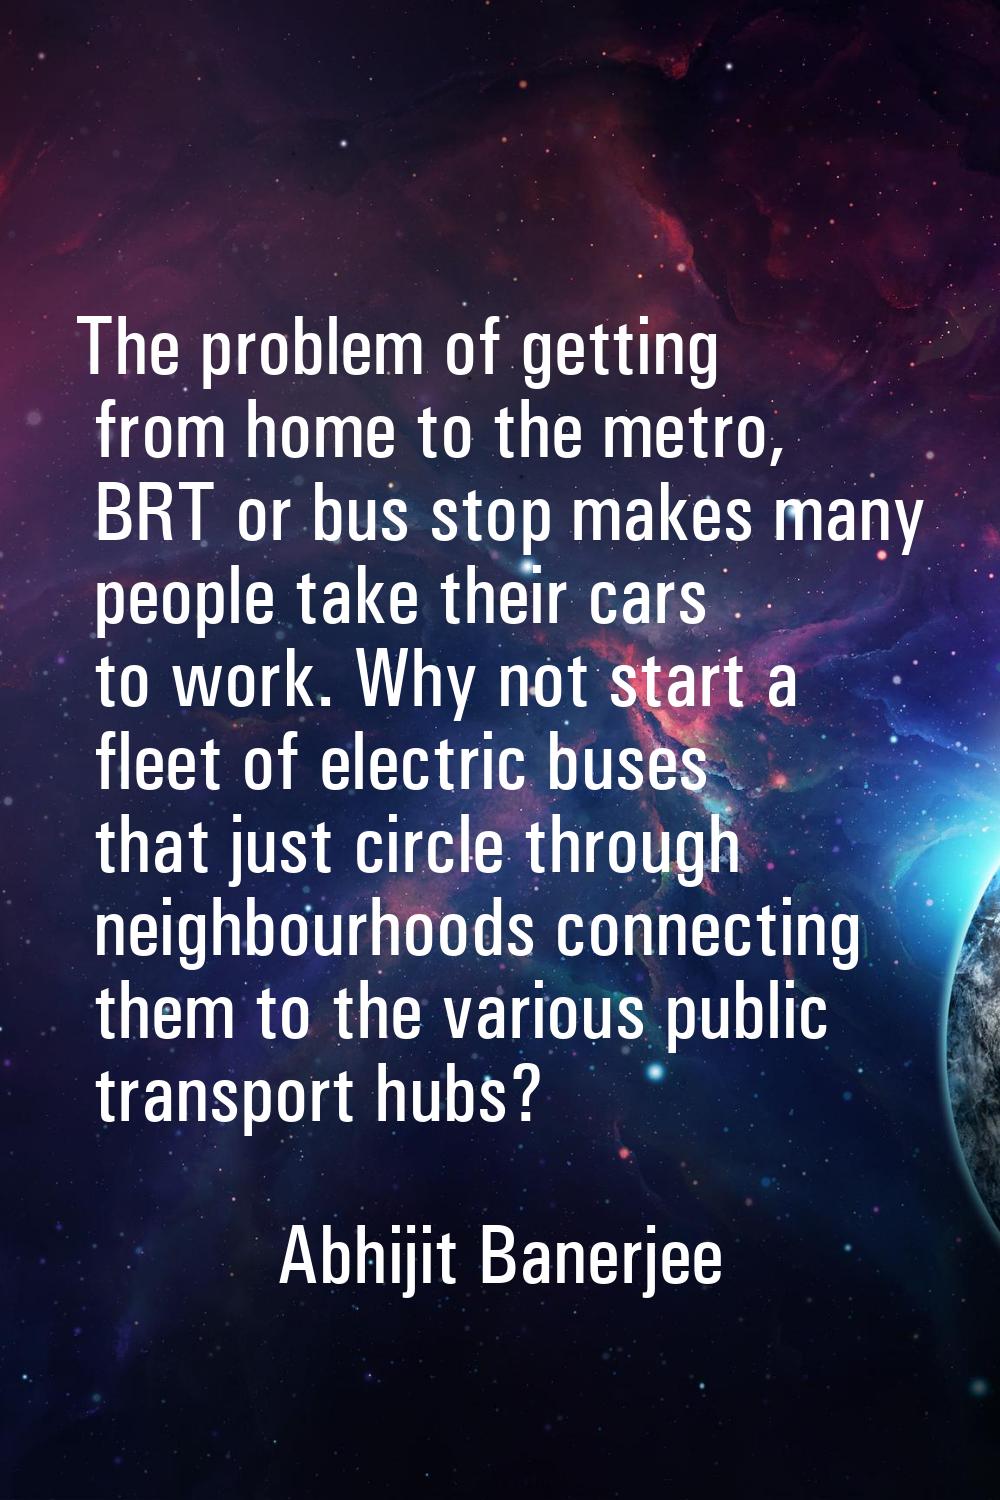 The problem of getting from home to the metro, BRT or bus stop makes many people take their cars to